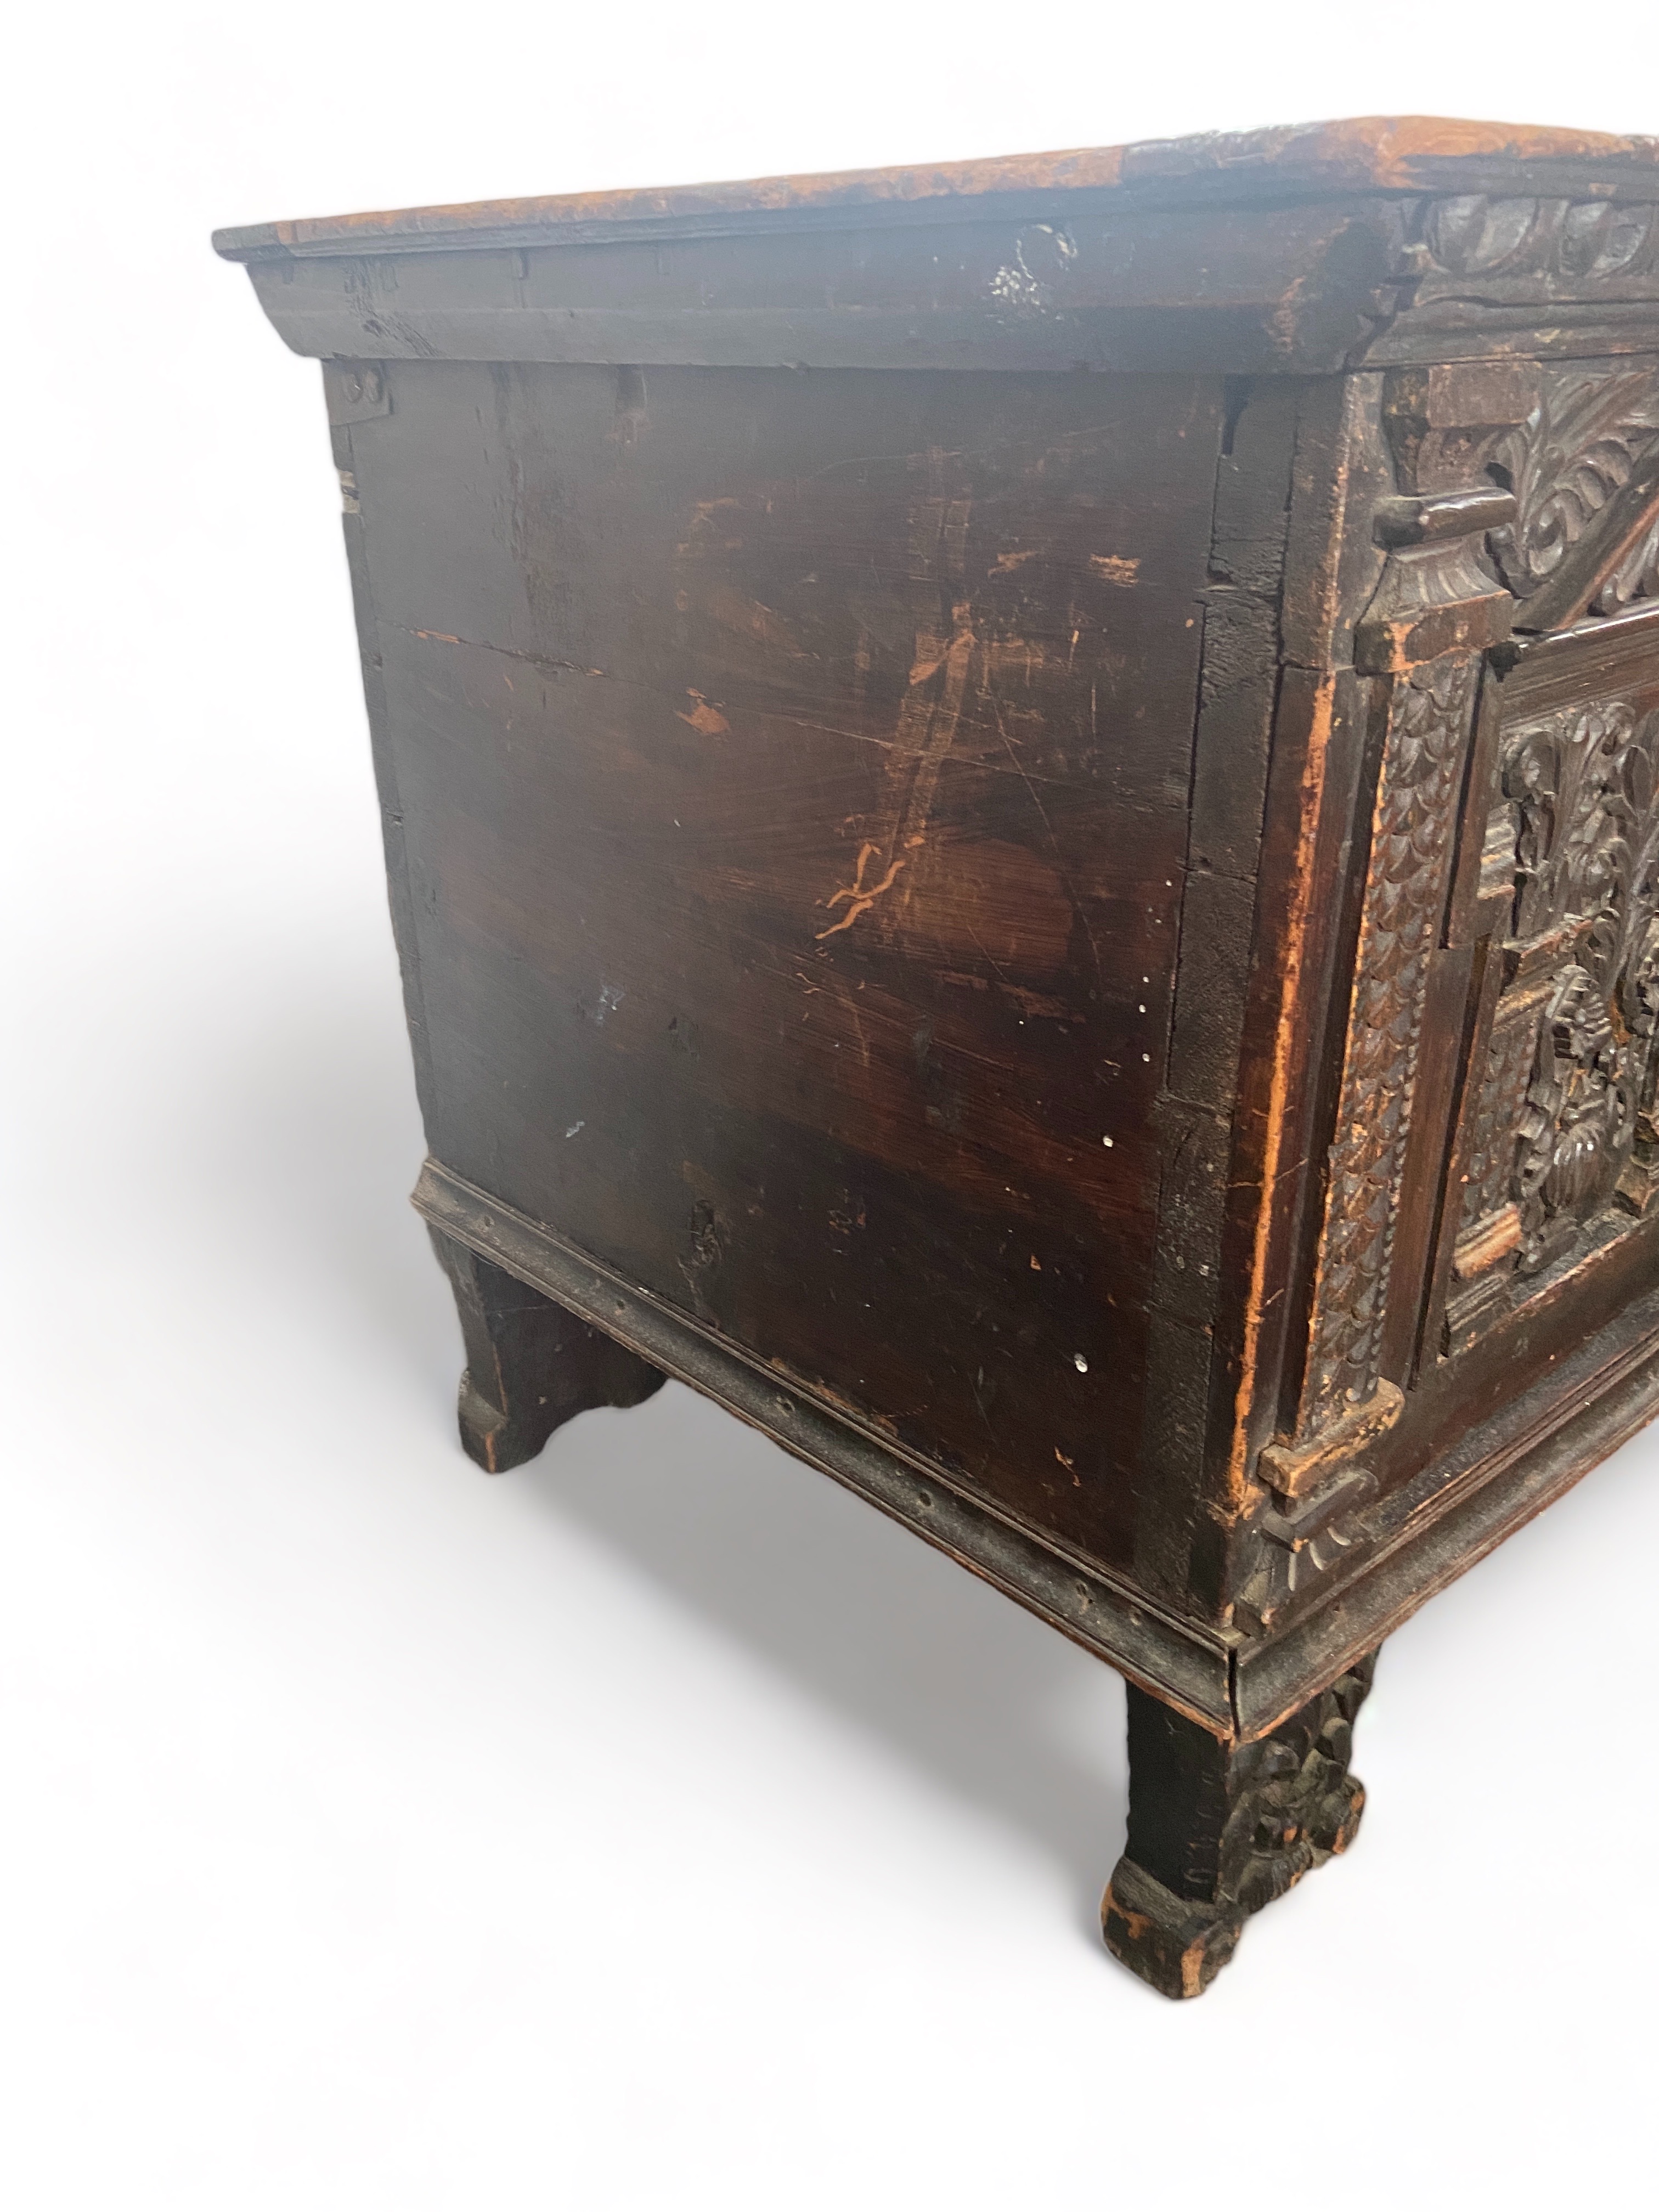 A large 17th century carved stained pine chest, Northern European - Image 6 of 6